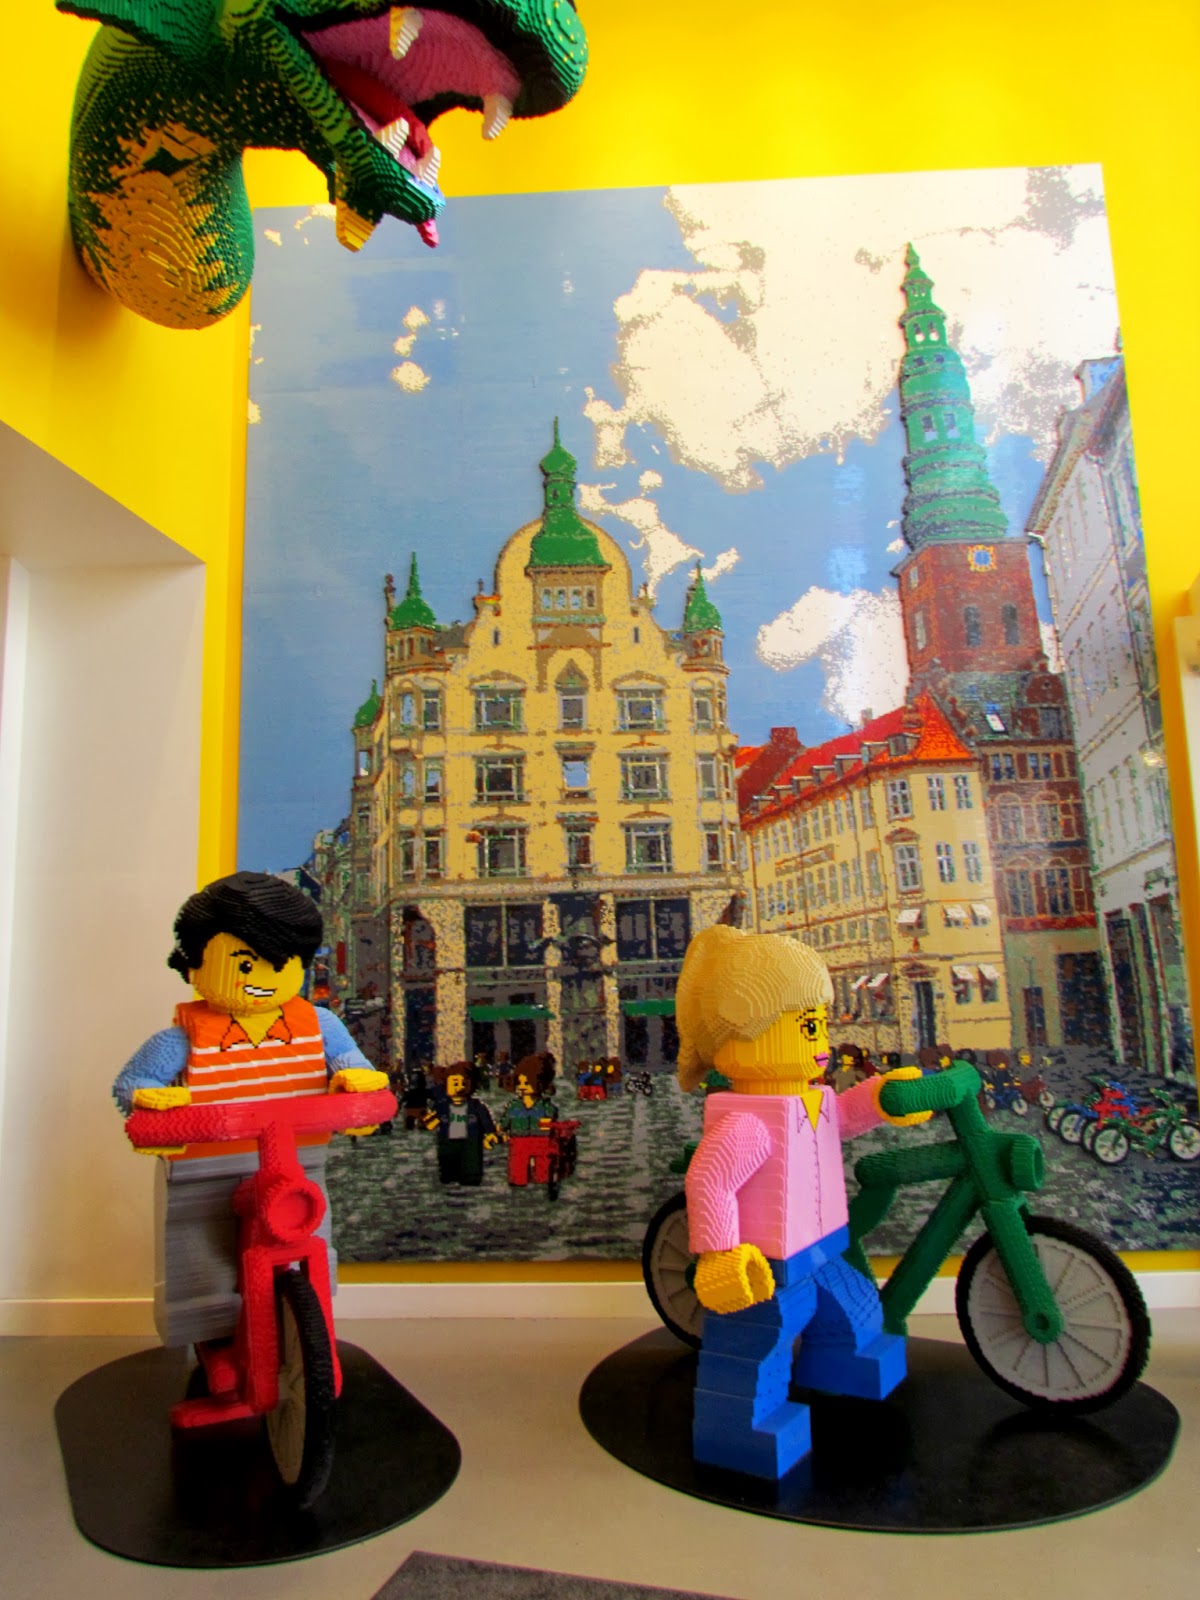 the mural on the wall of copenhagen is entirely made up of lego s